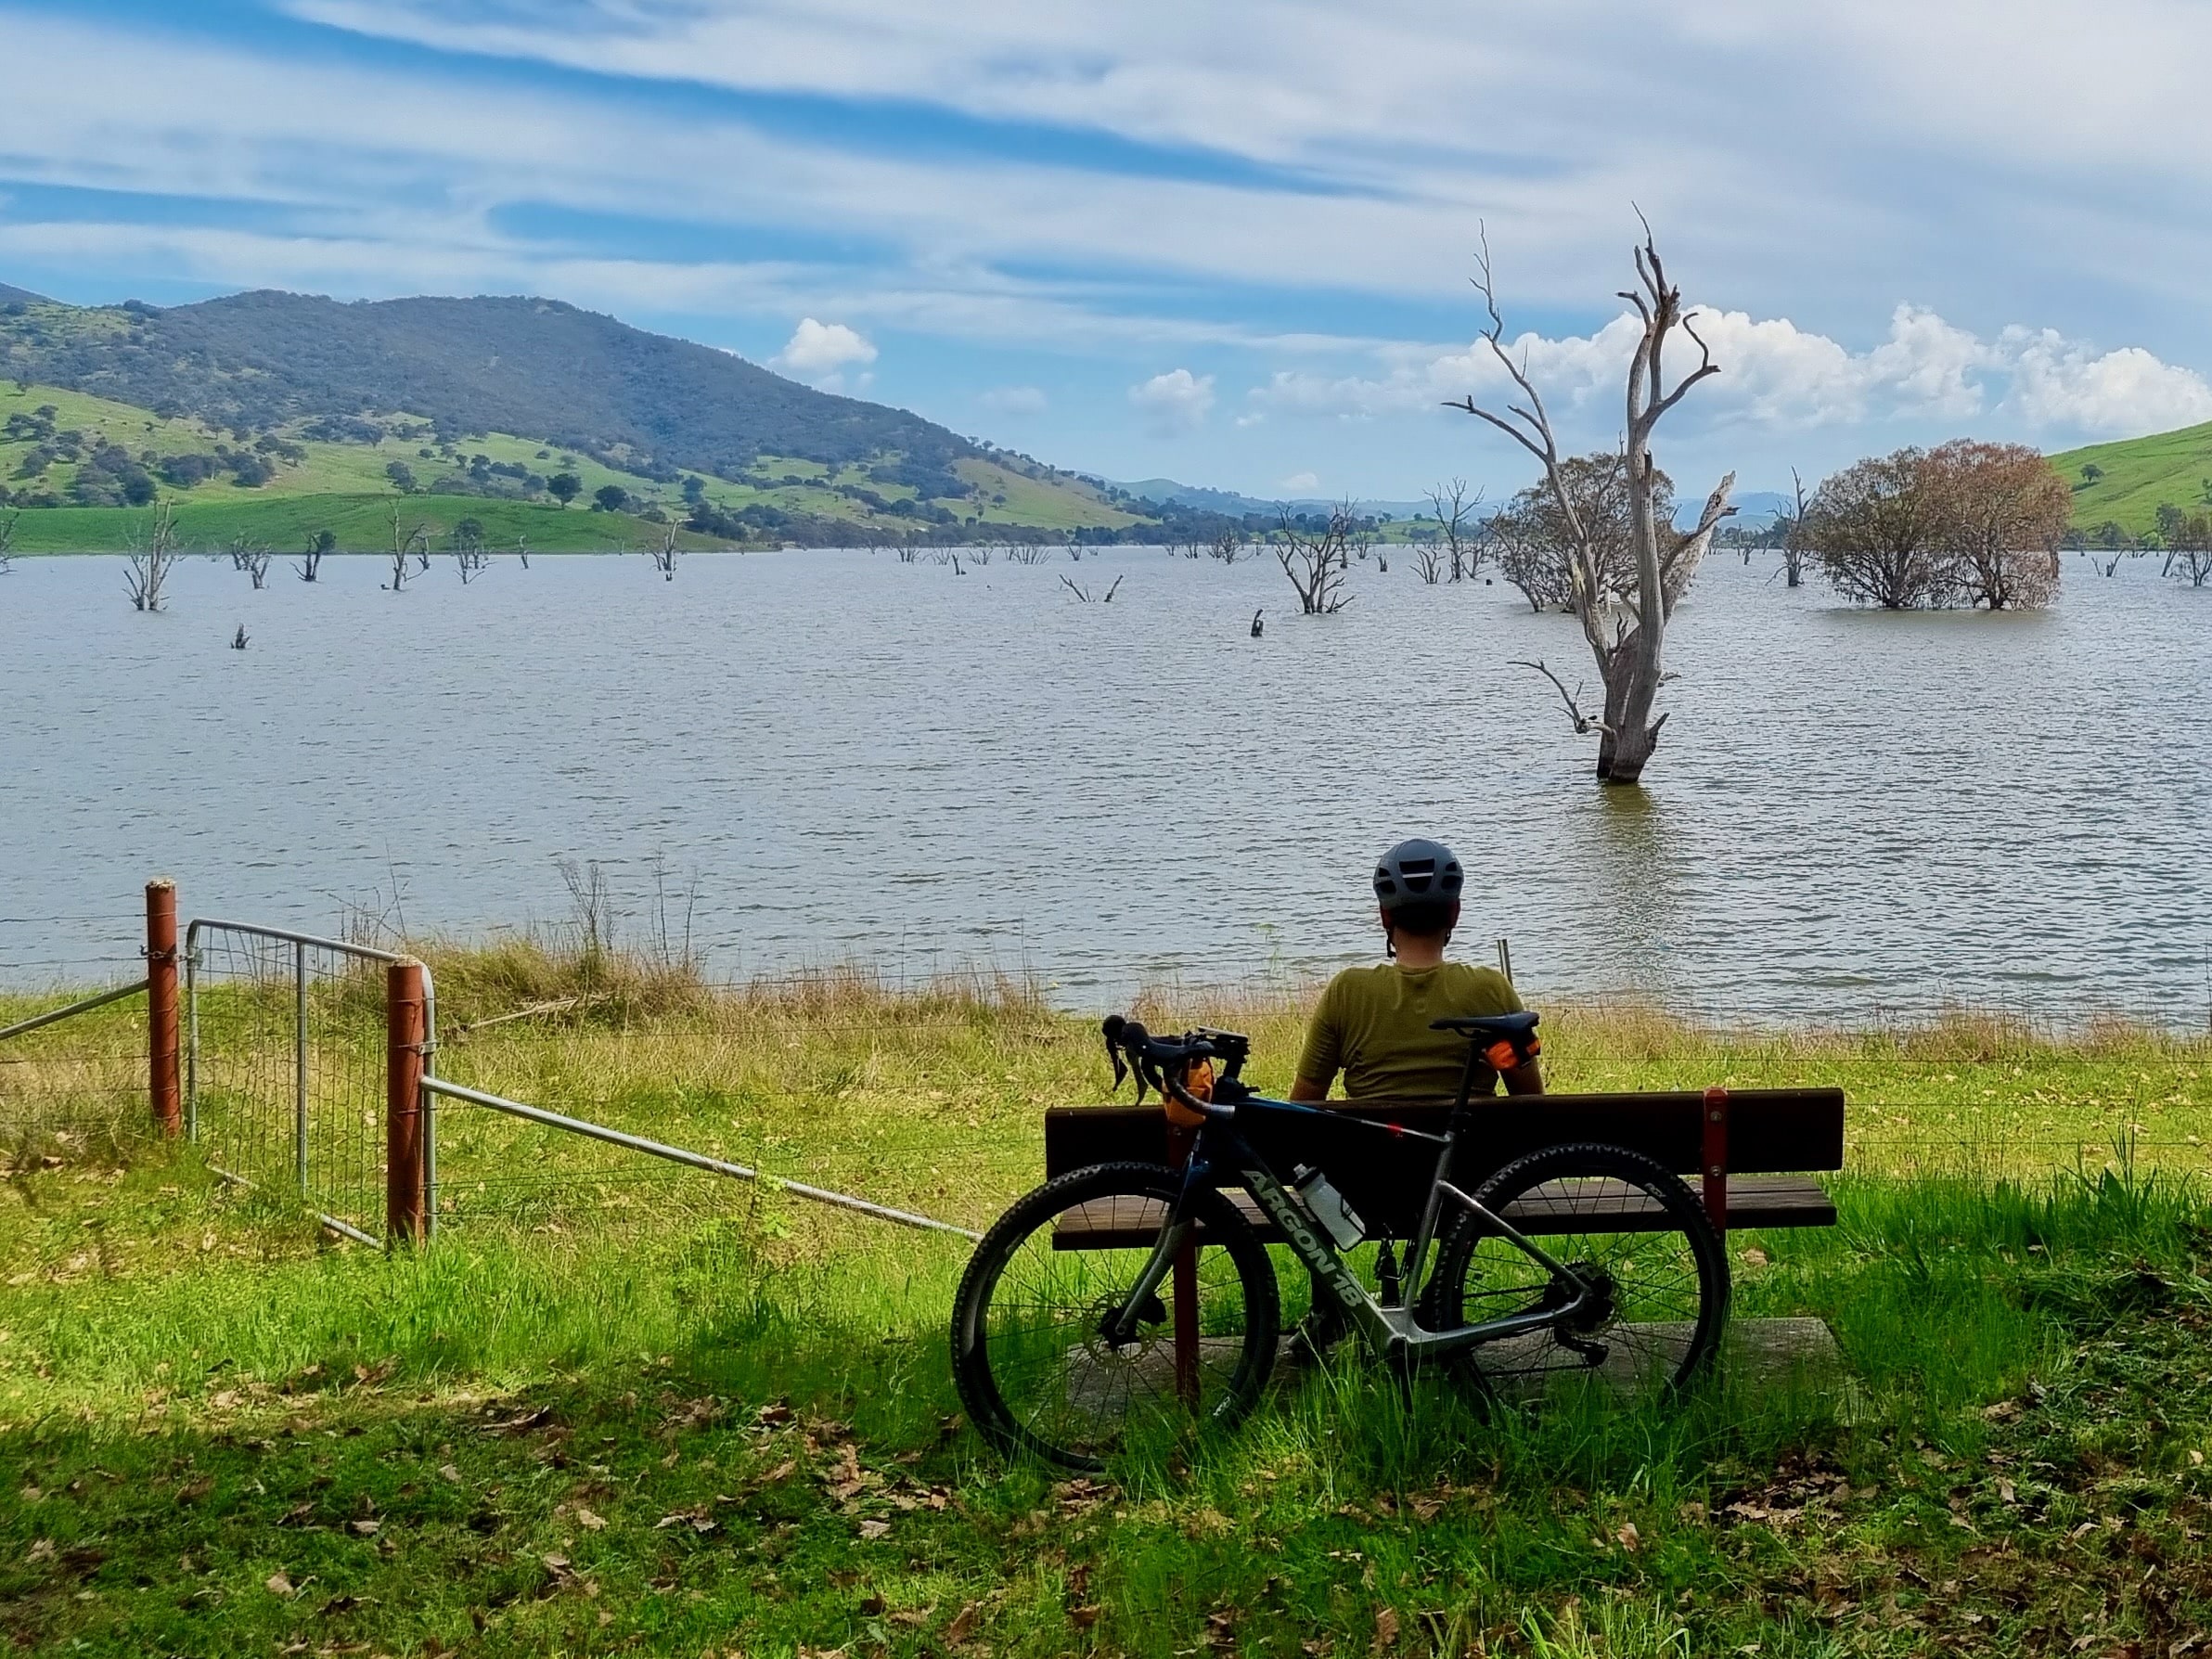 Cyclist sitting on a park bench on the edge of lake enjoying the view